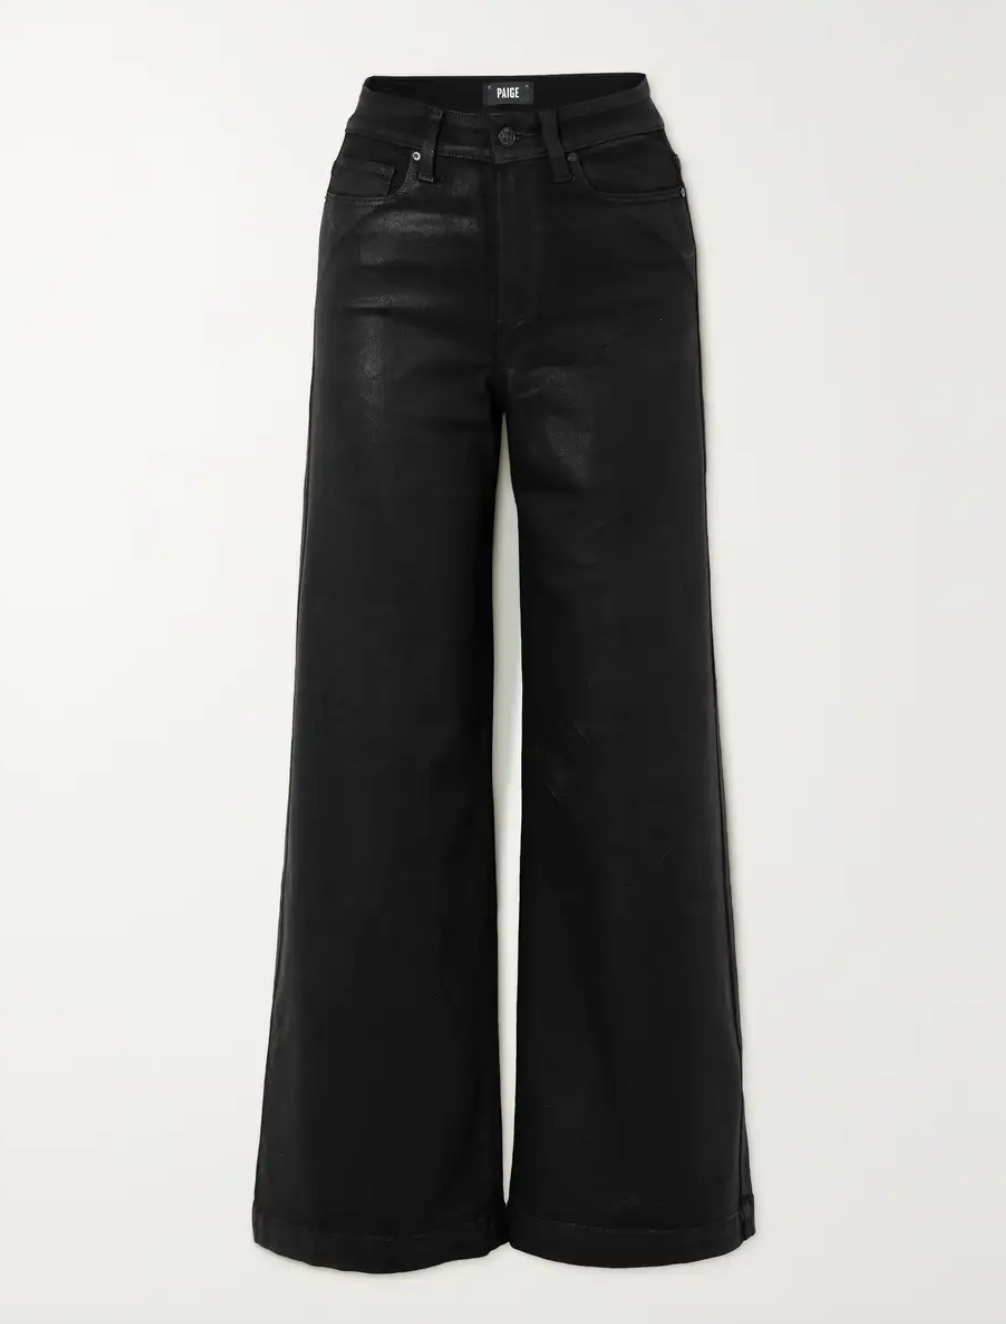 PAIGE + Harper high-rise coated wide-leg jeans